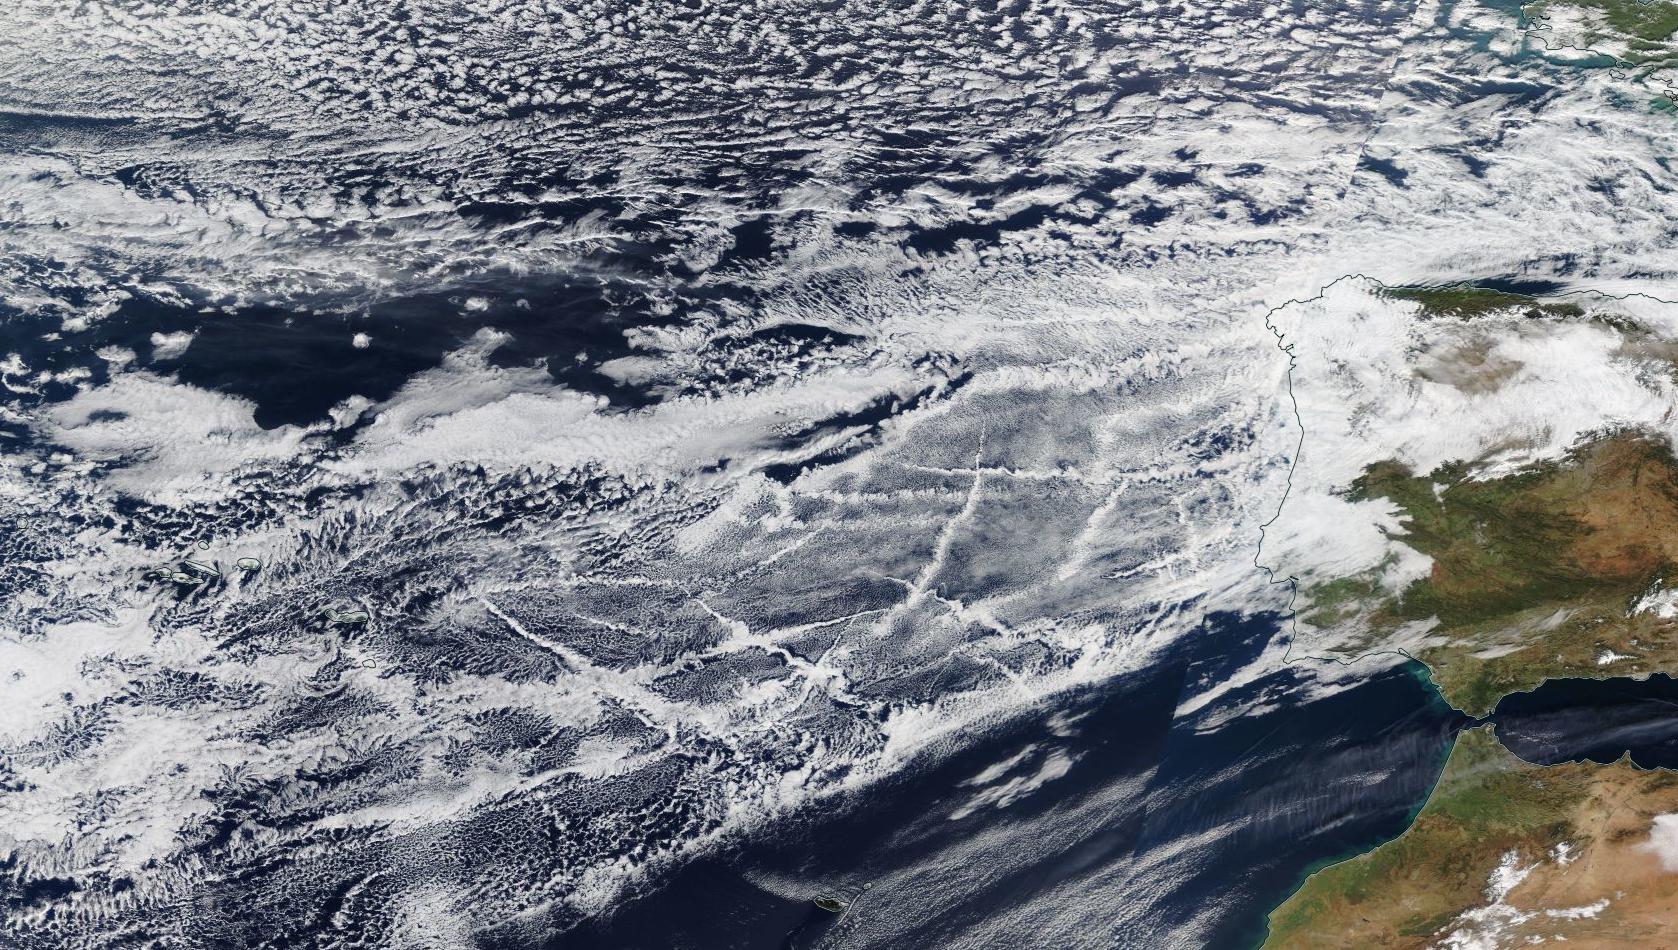 Shiptracks over the Bay of Biscay as seen from MODIS